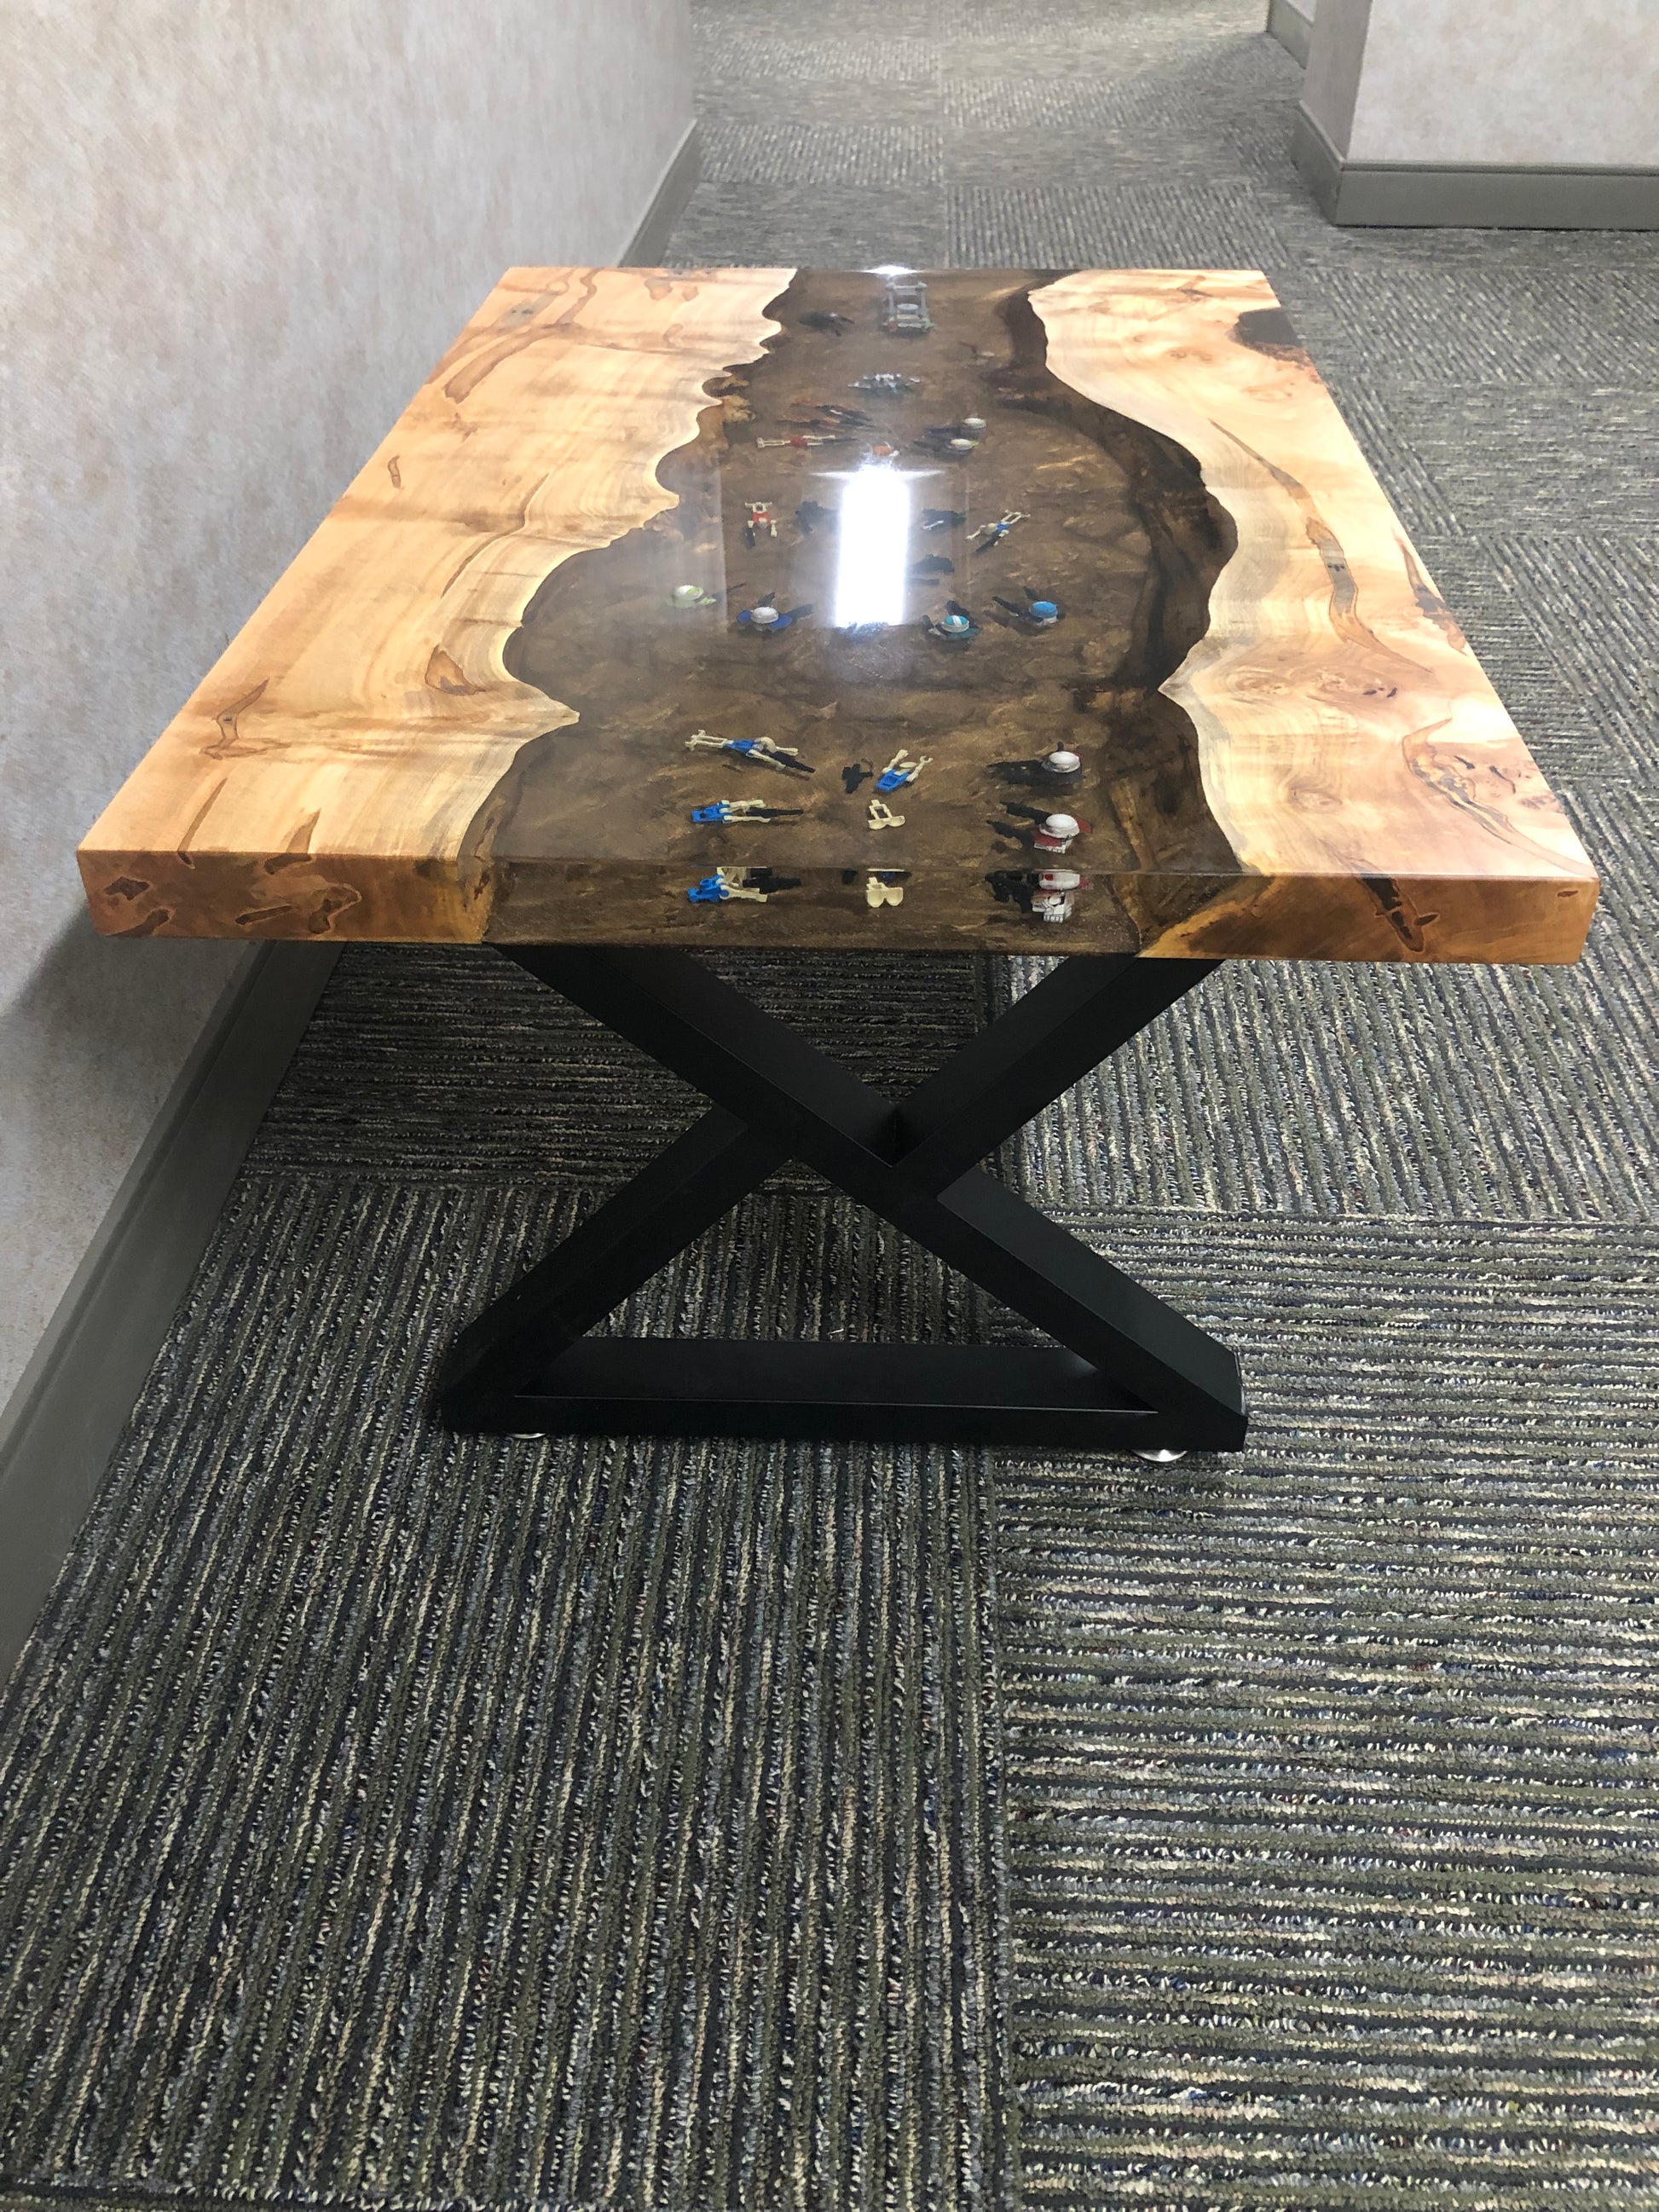 Star Wars River Table with multiple battle scenes view from side